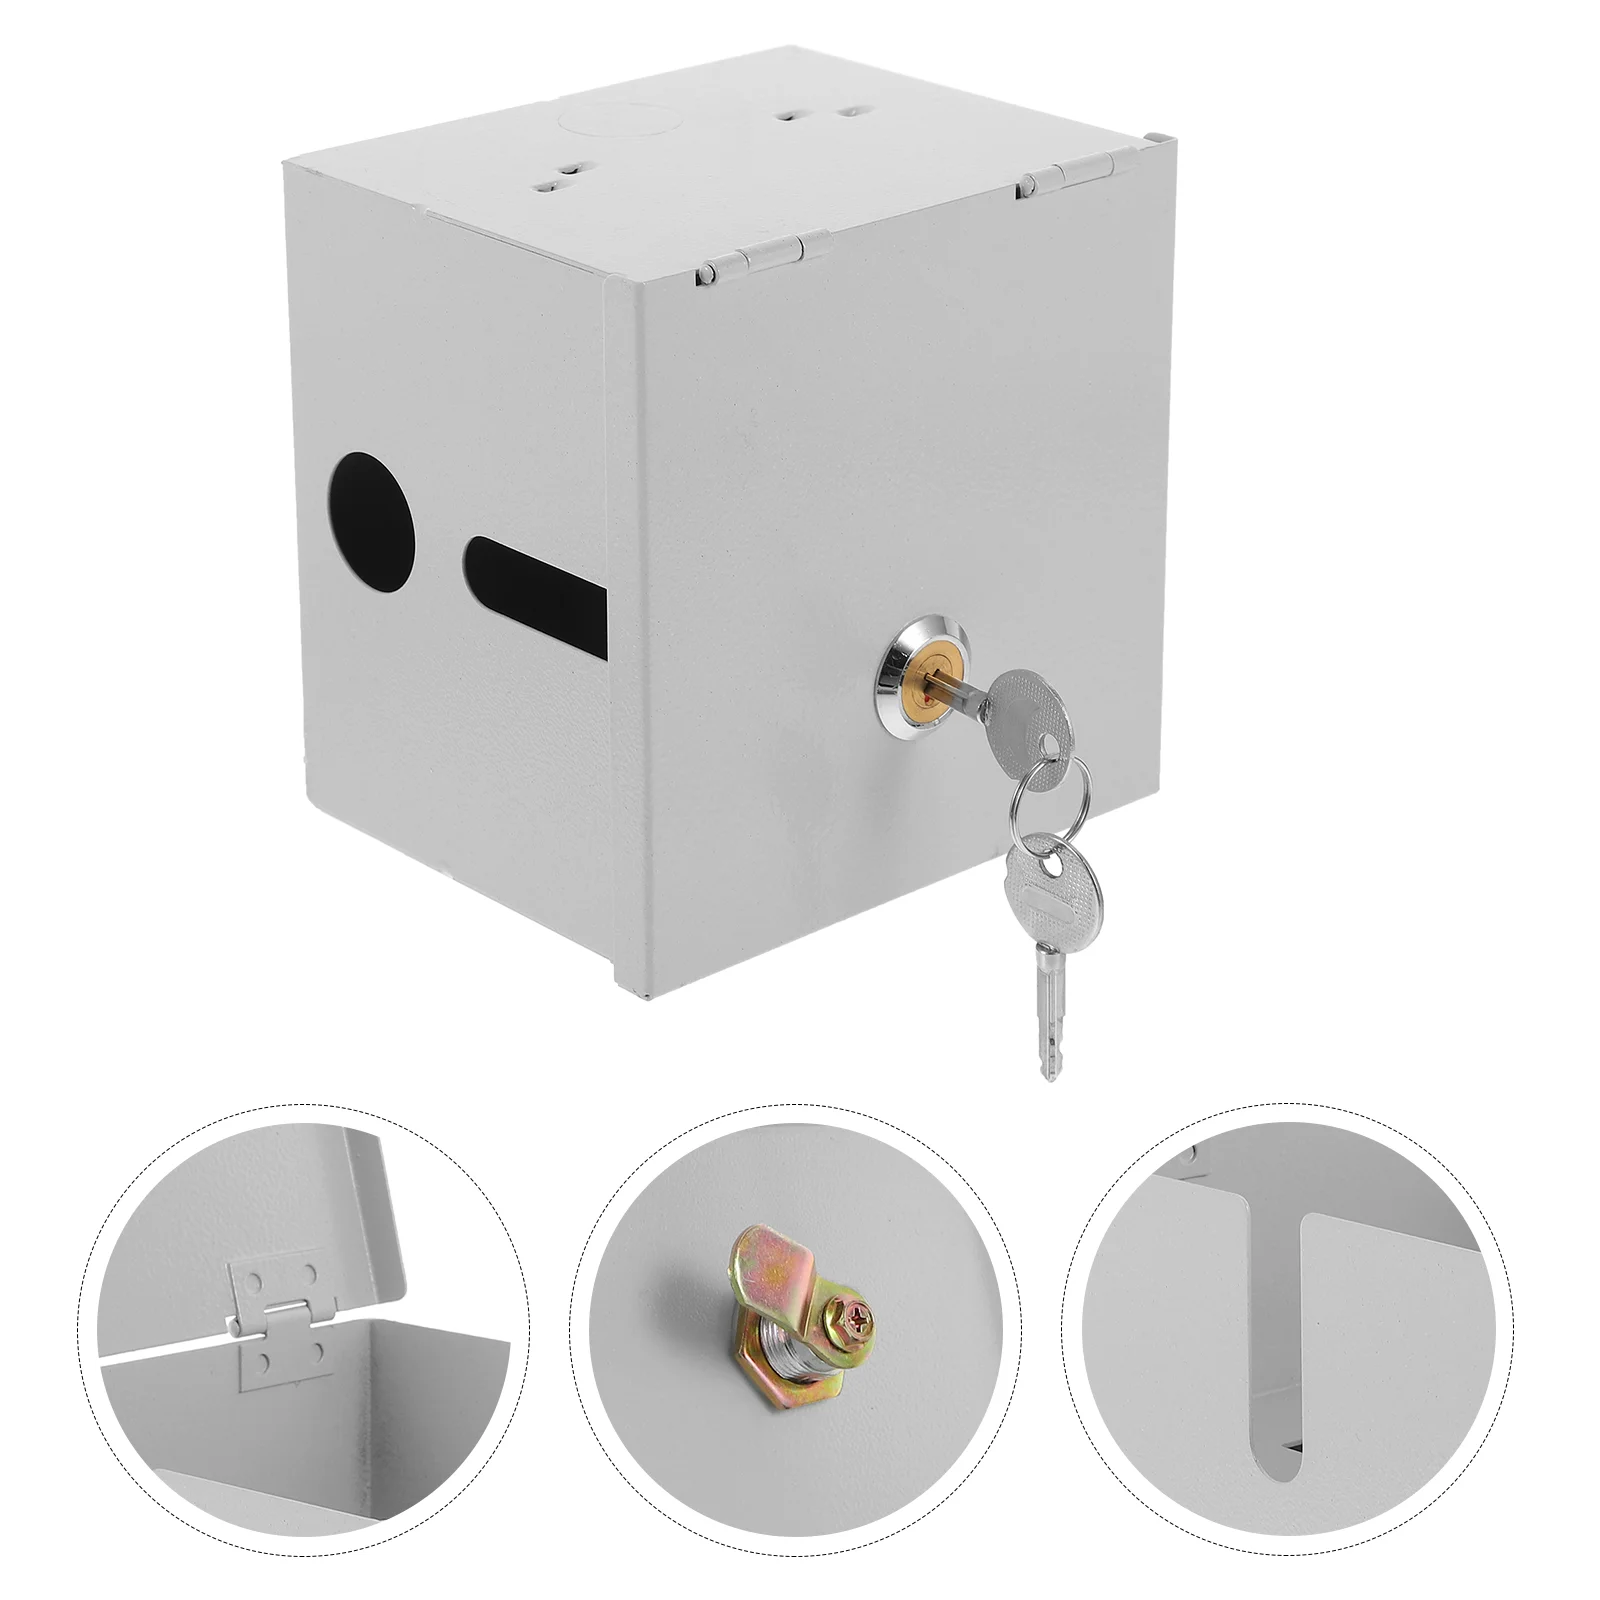 

Outdoor Electrical Box Outlet Lock Case Anti-theft Socket Protector Cover